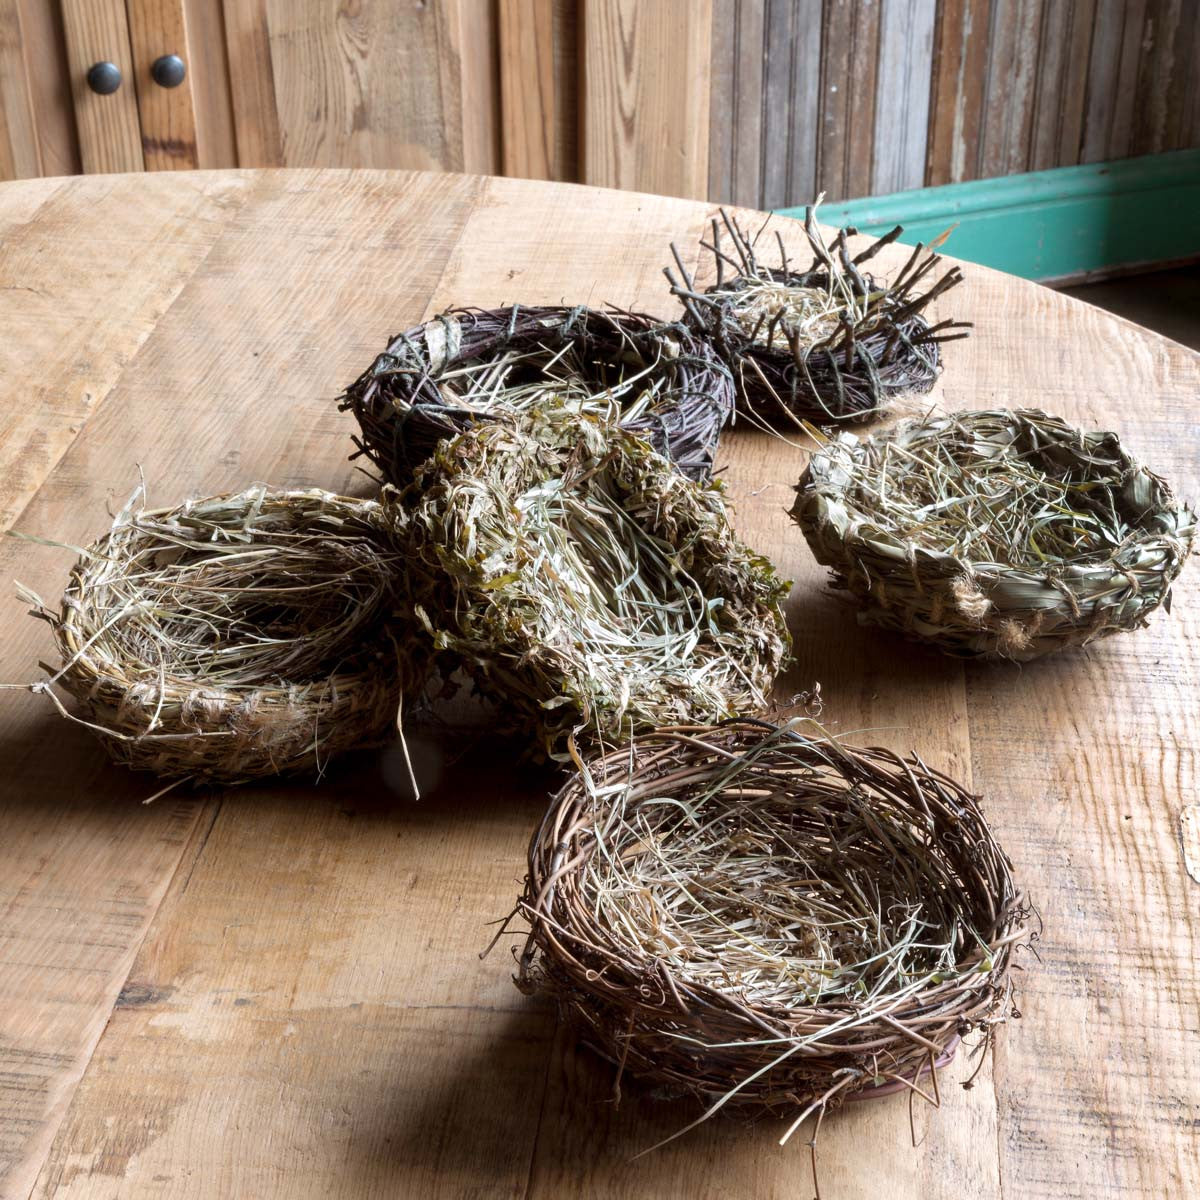 Inspired by mother nature, this collection of natural woven nests can be worked into a variety of decorative elements and displays. Set of 6, each design varies.  Set of 6, Assorted Styles